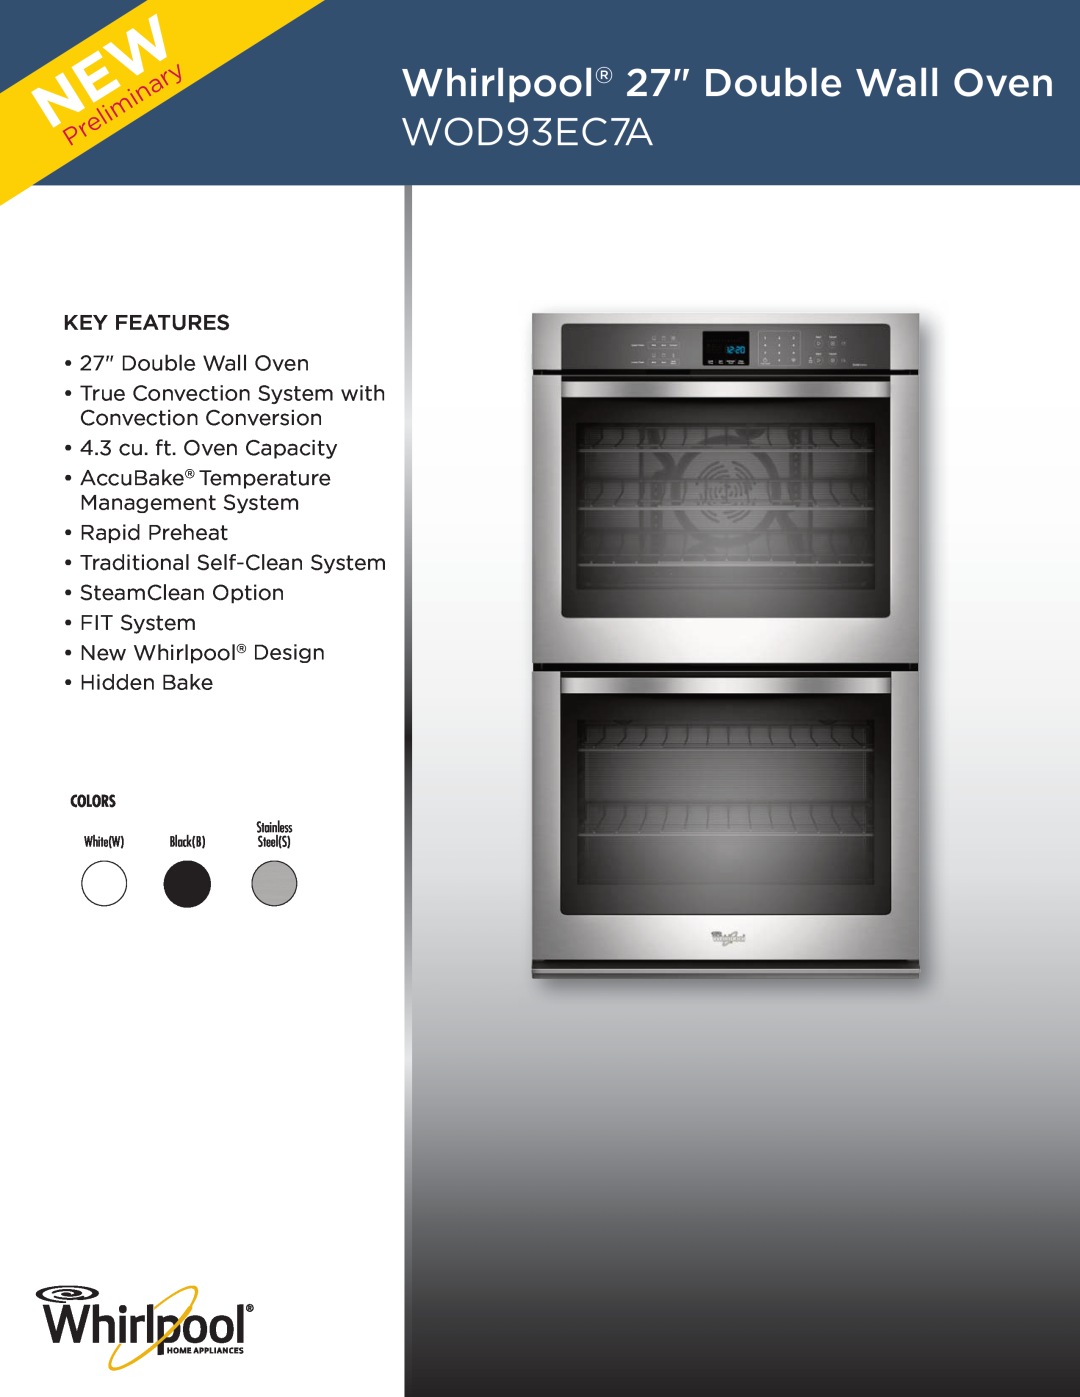 Whirlpool WOS51EC0A Whirlpool 27 Double Wall Oven WOD93EC7A, NEWPreliminary, key features 27 Double Wall Oven, Colors 